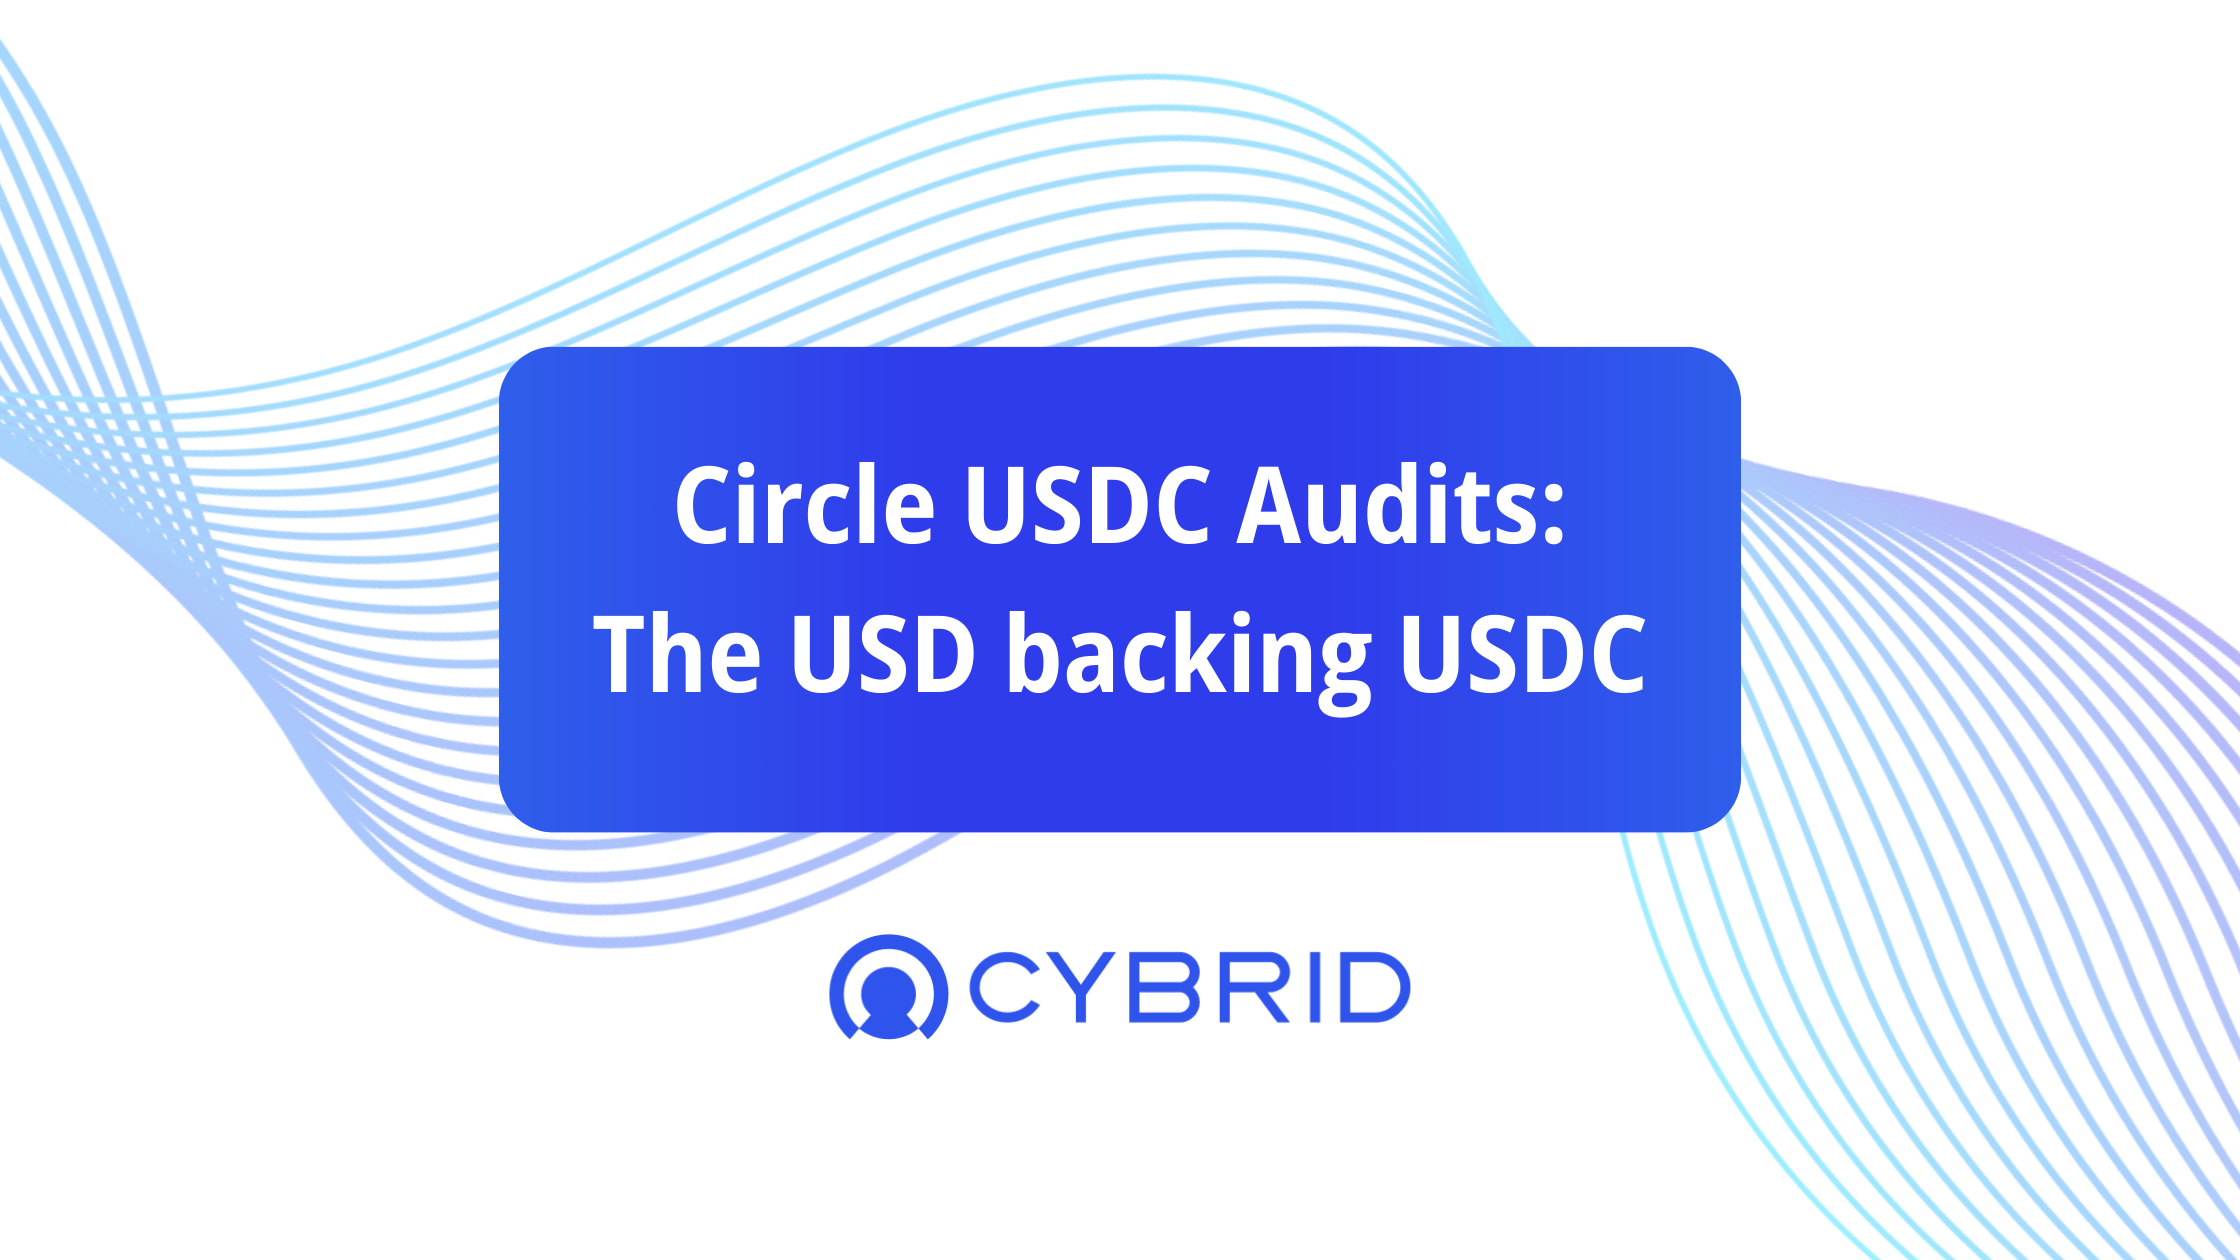 Is USDC backed by USD? Learn about Circle's USDC Audits